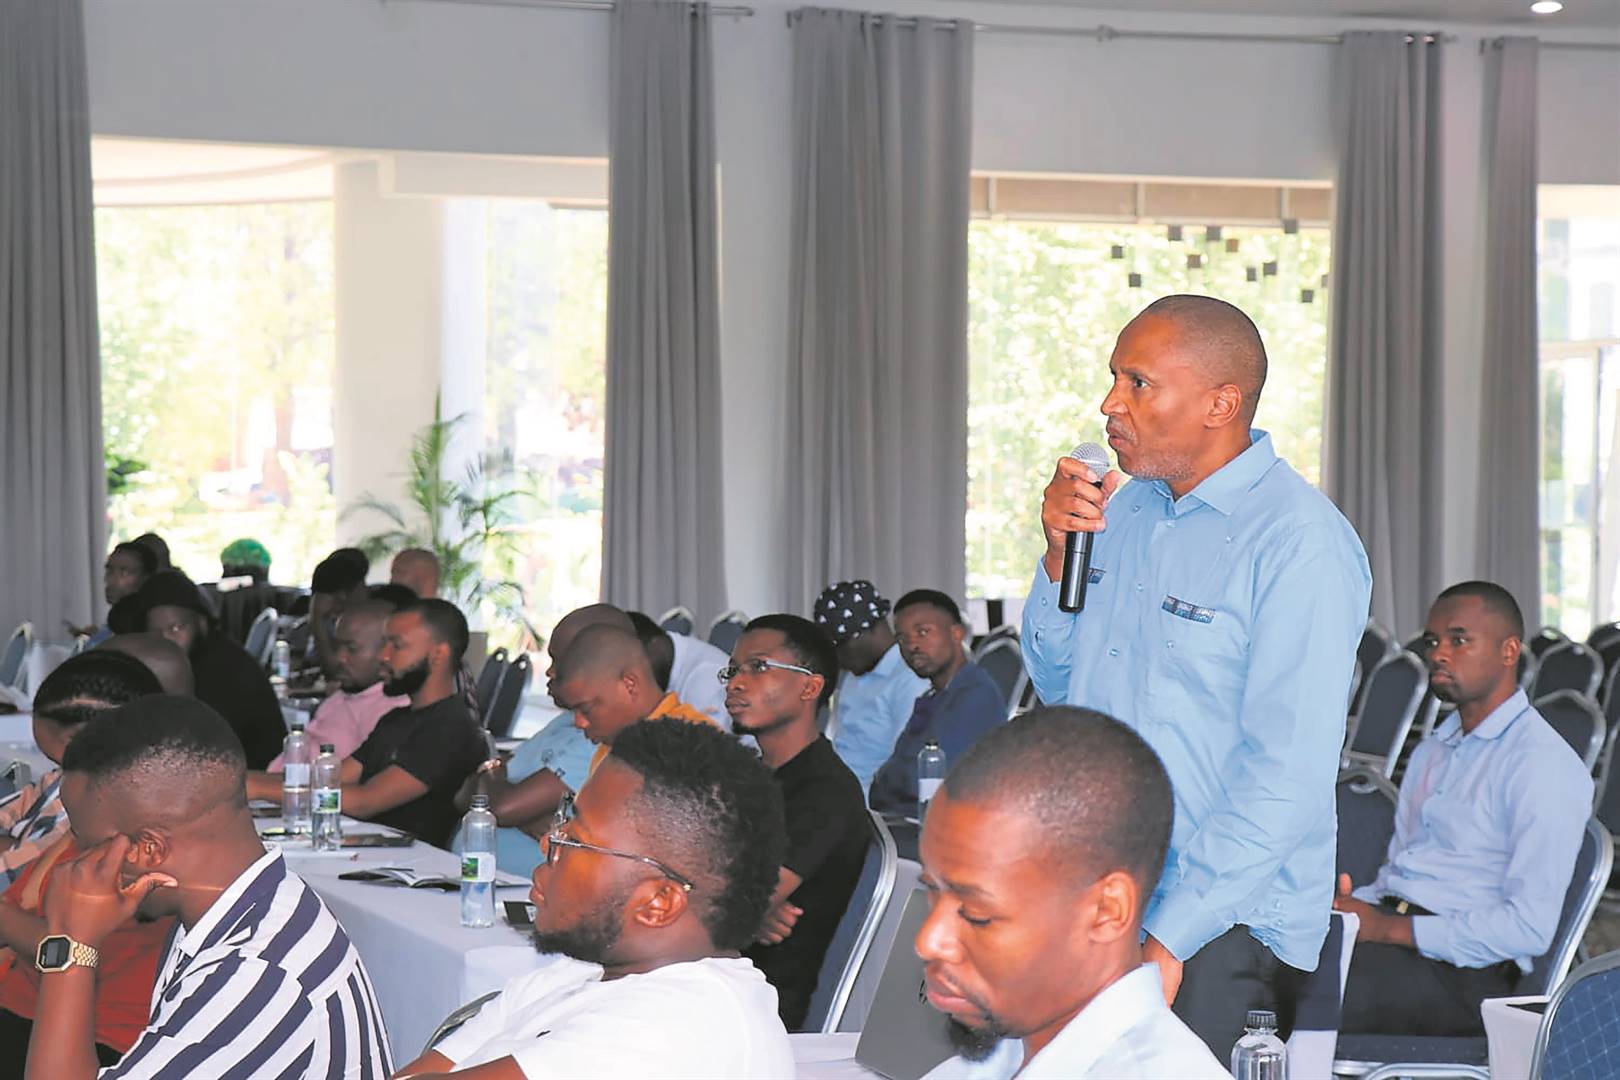 Men gathered at Lakes Hotel and Conference Centre in Benoni, Ekurhuleni, to celebrate International Men’s Day and engage on issues that affect them.